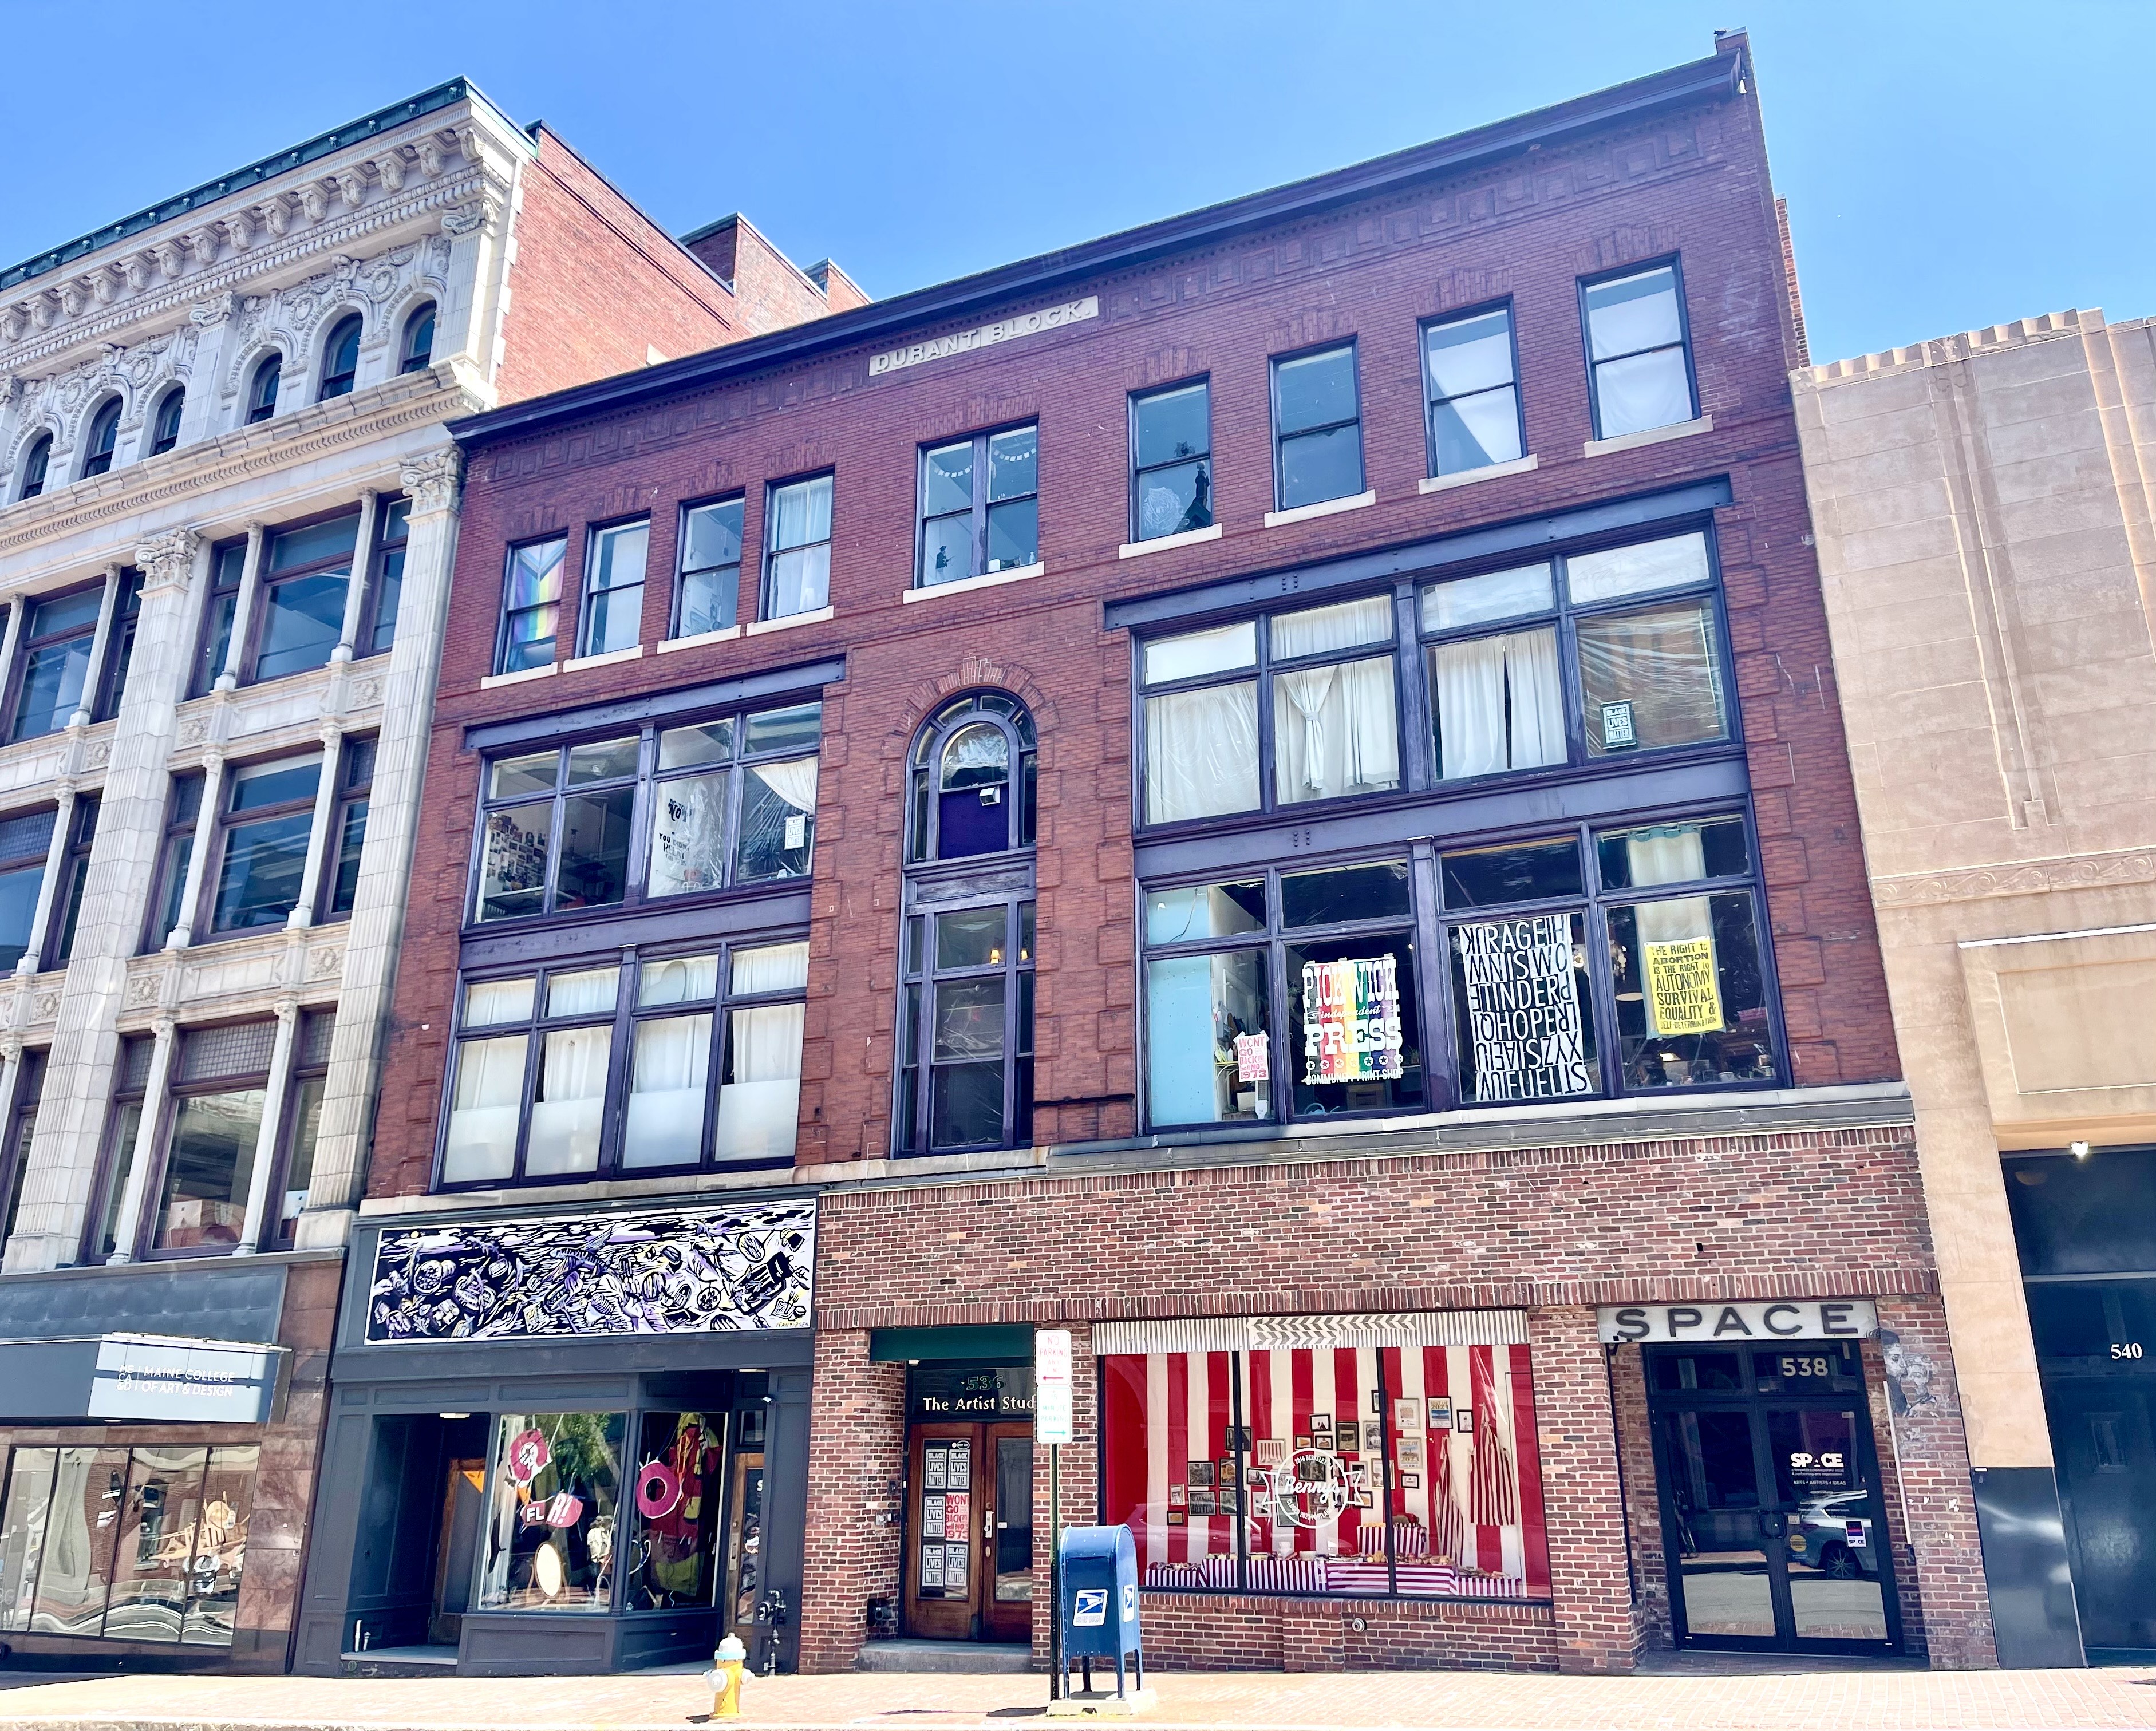 a photograph of SPACE Gallery on Congress Street in spring 2023 shows a vibrant window exhibit between the primary exhibition space and main venue